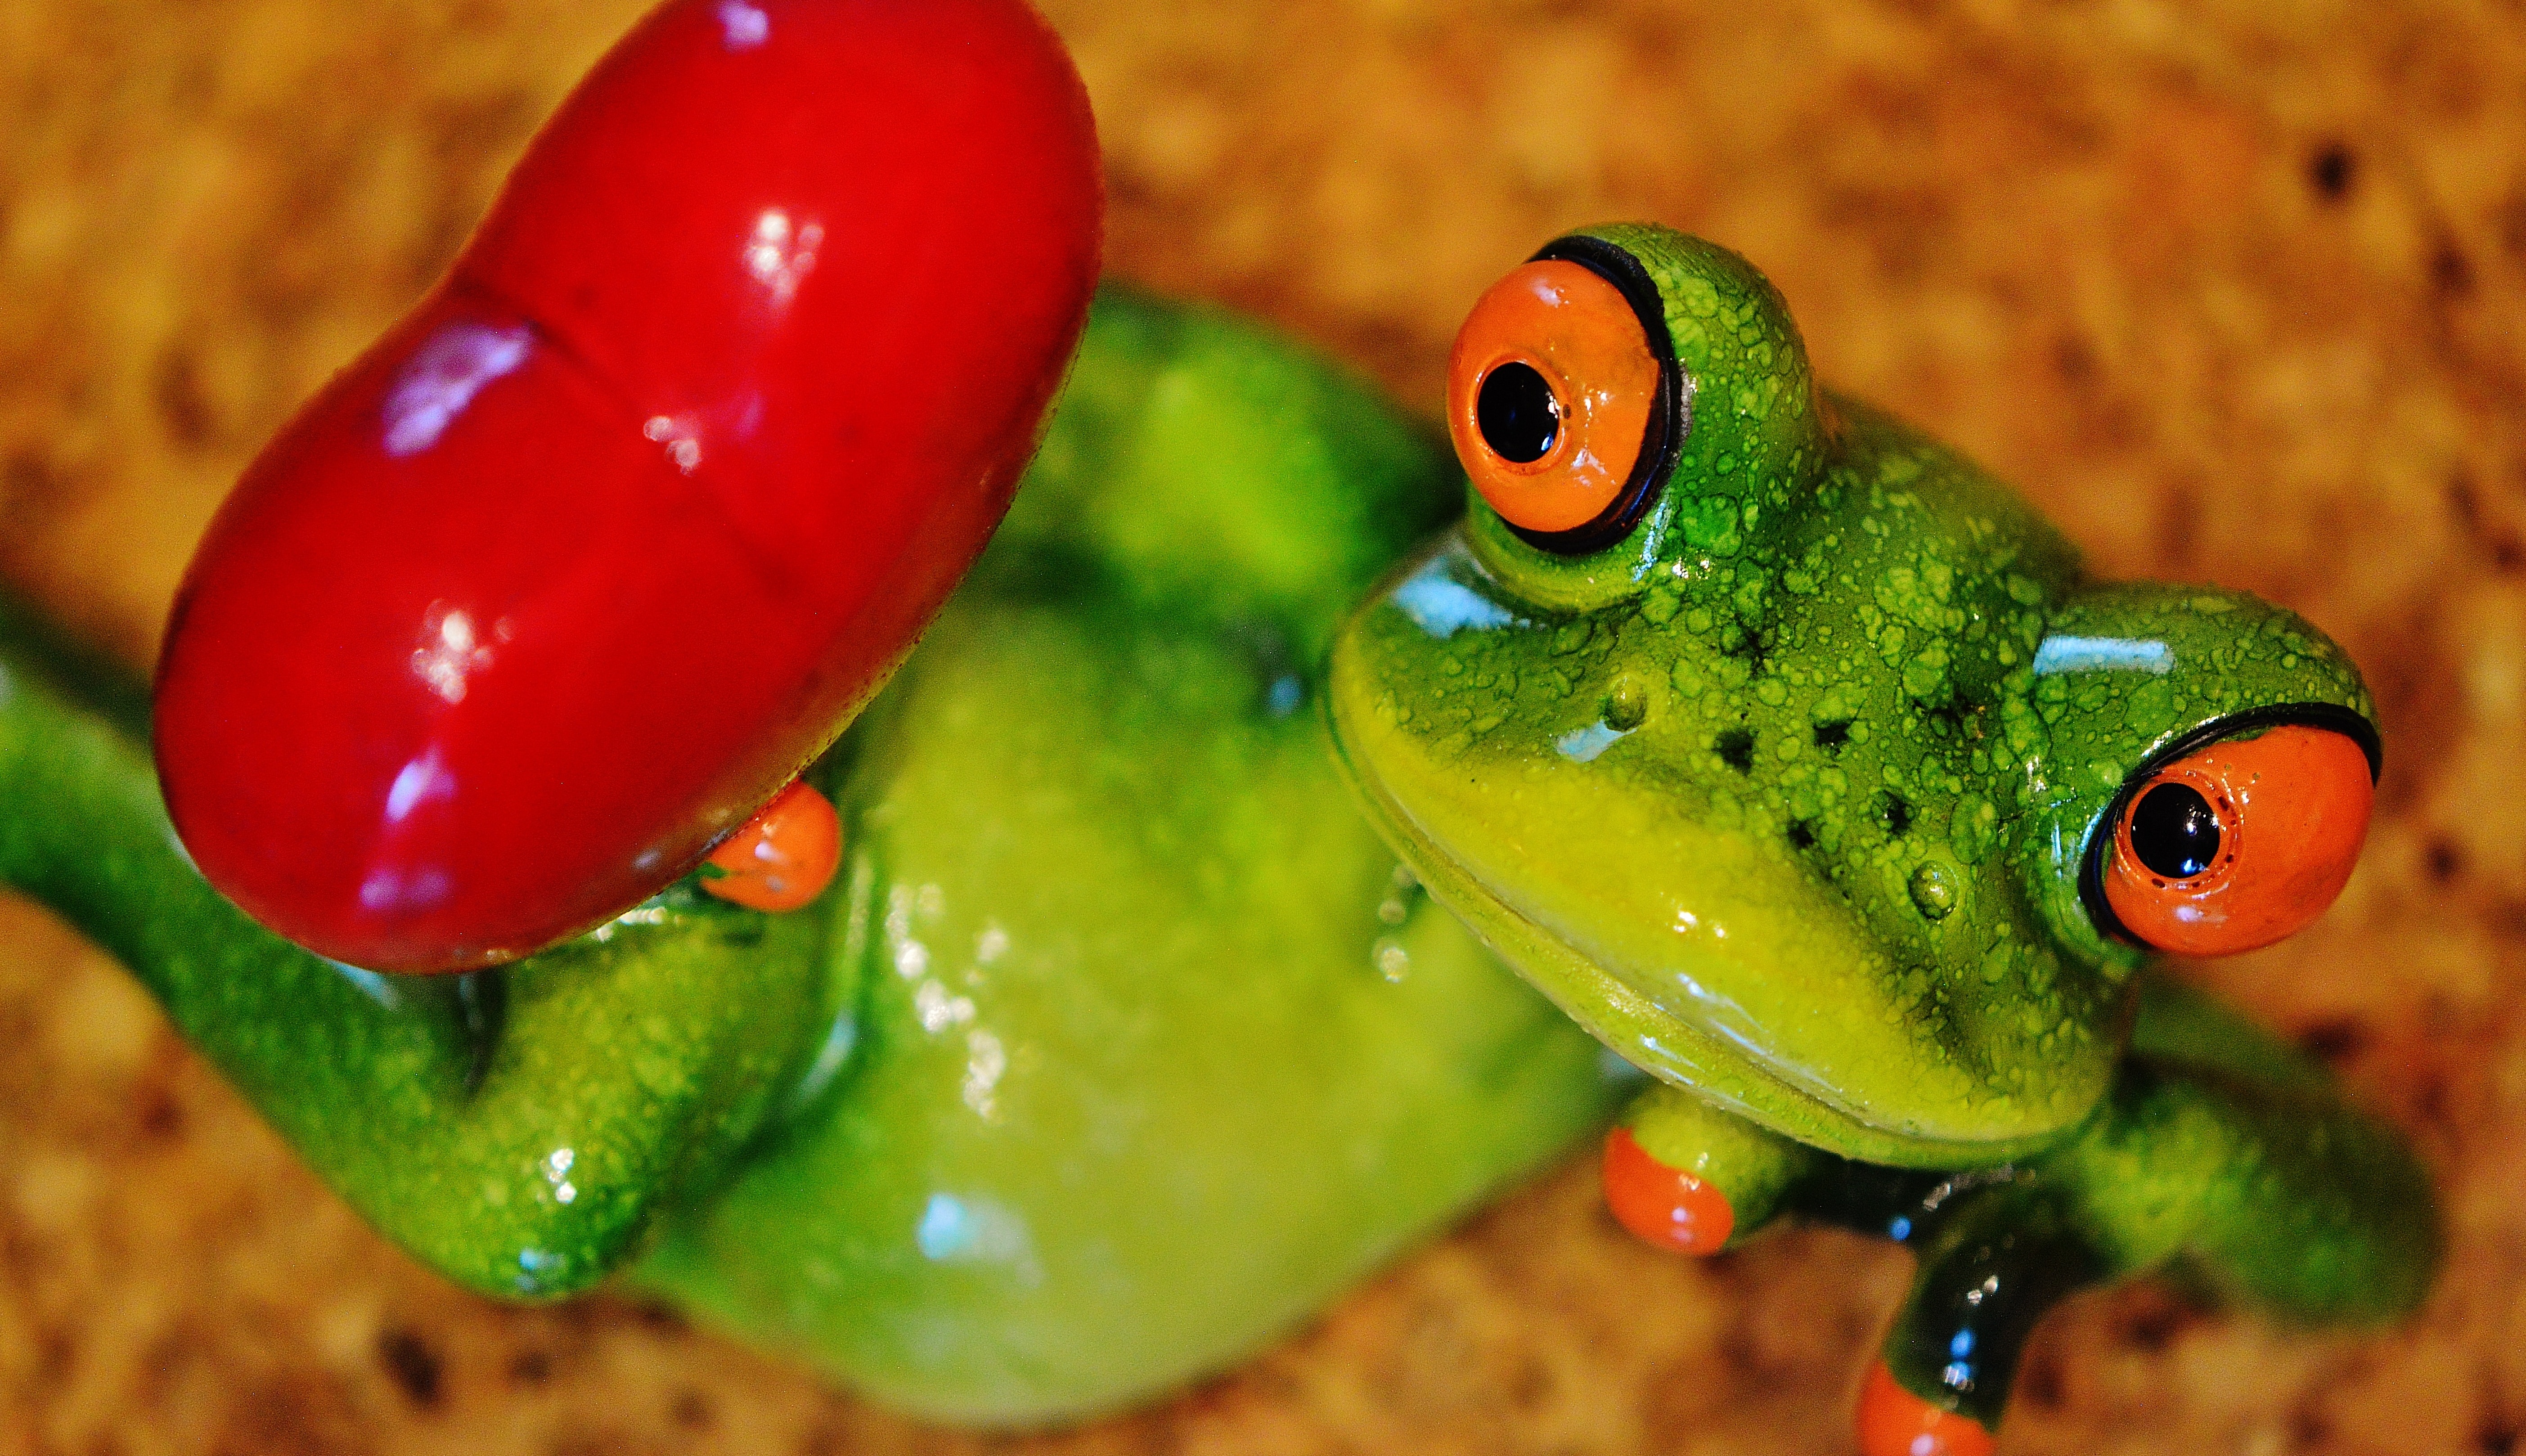 green and red ceramic frog figurine